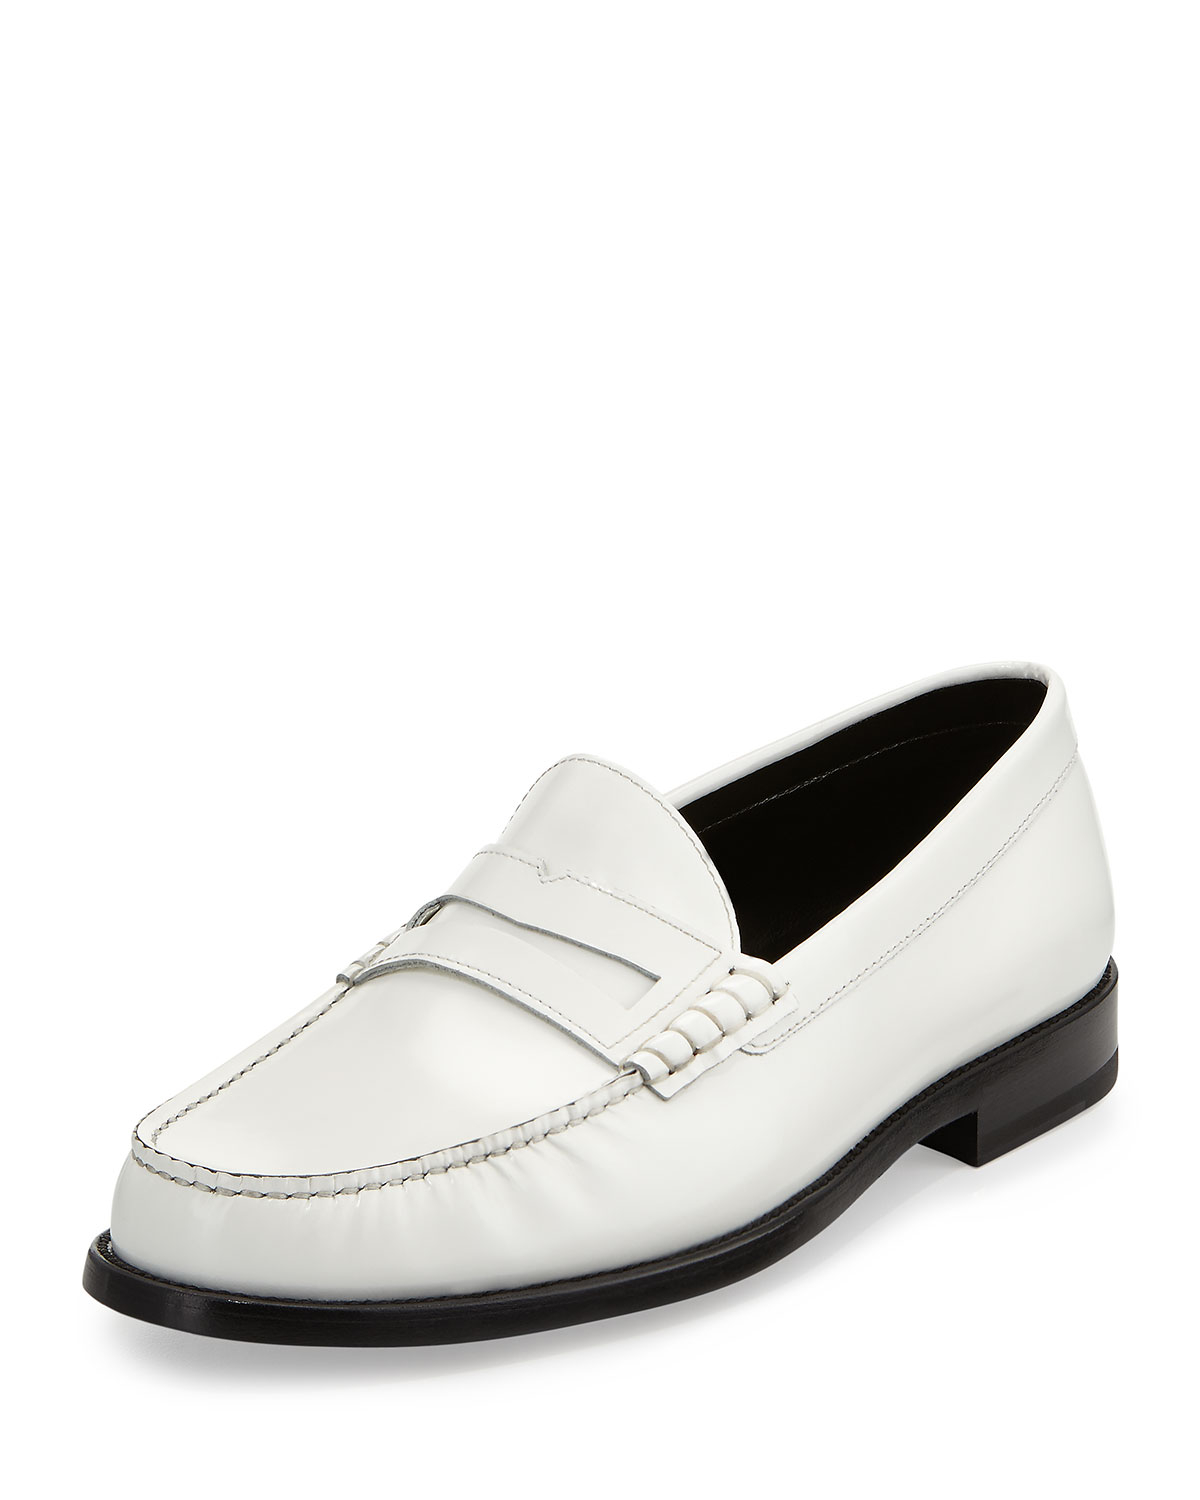 Saint Laurent Classic Leather Penny Loafer White for Men - Lyst